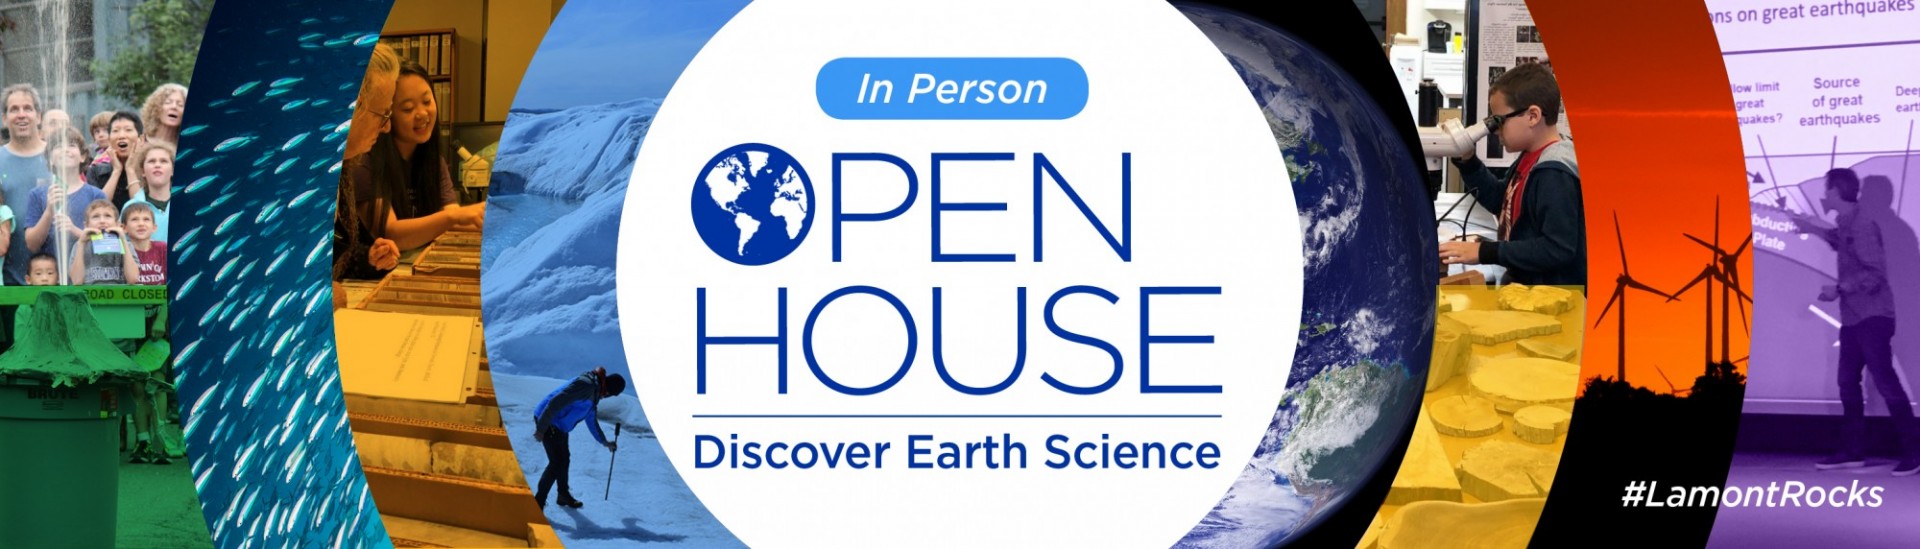 In-Person Lamont-Doherty Earth Observatory Open House: Discover Earth Science #lamontrocks